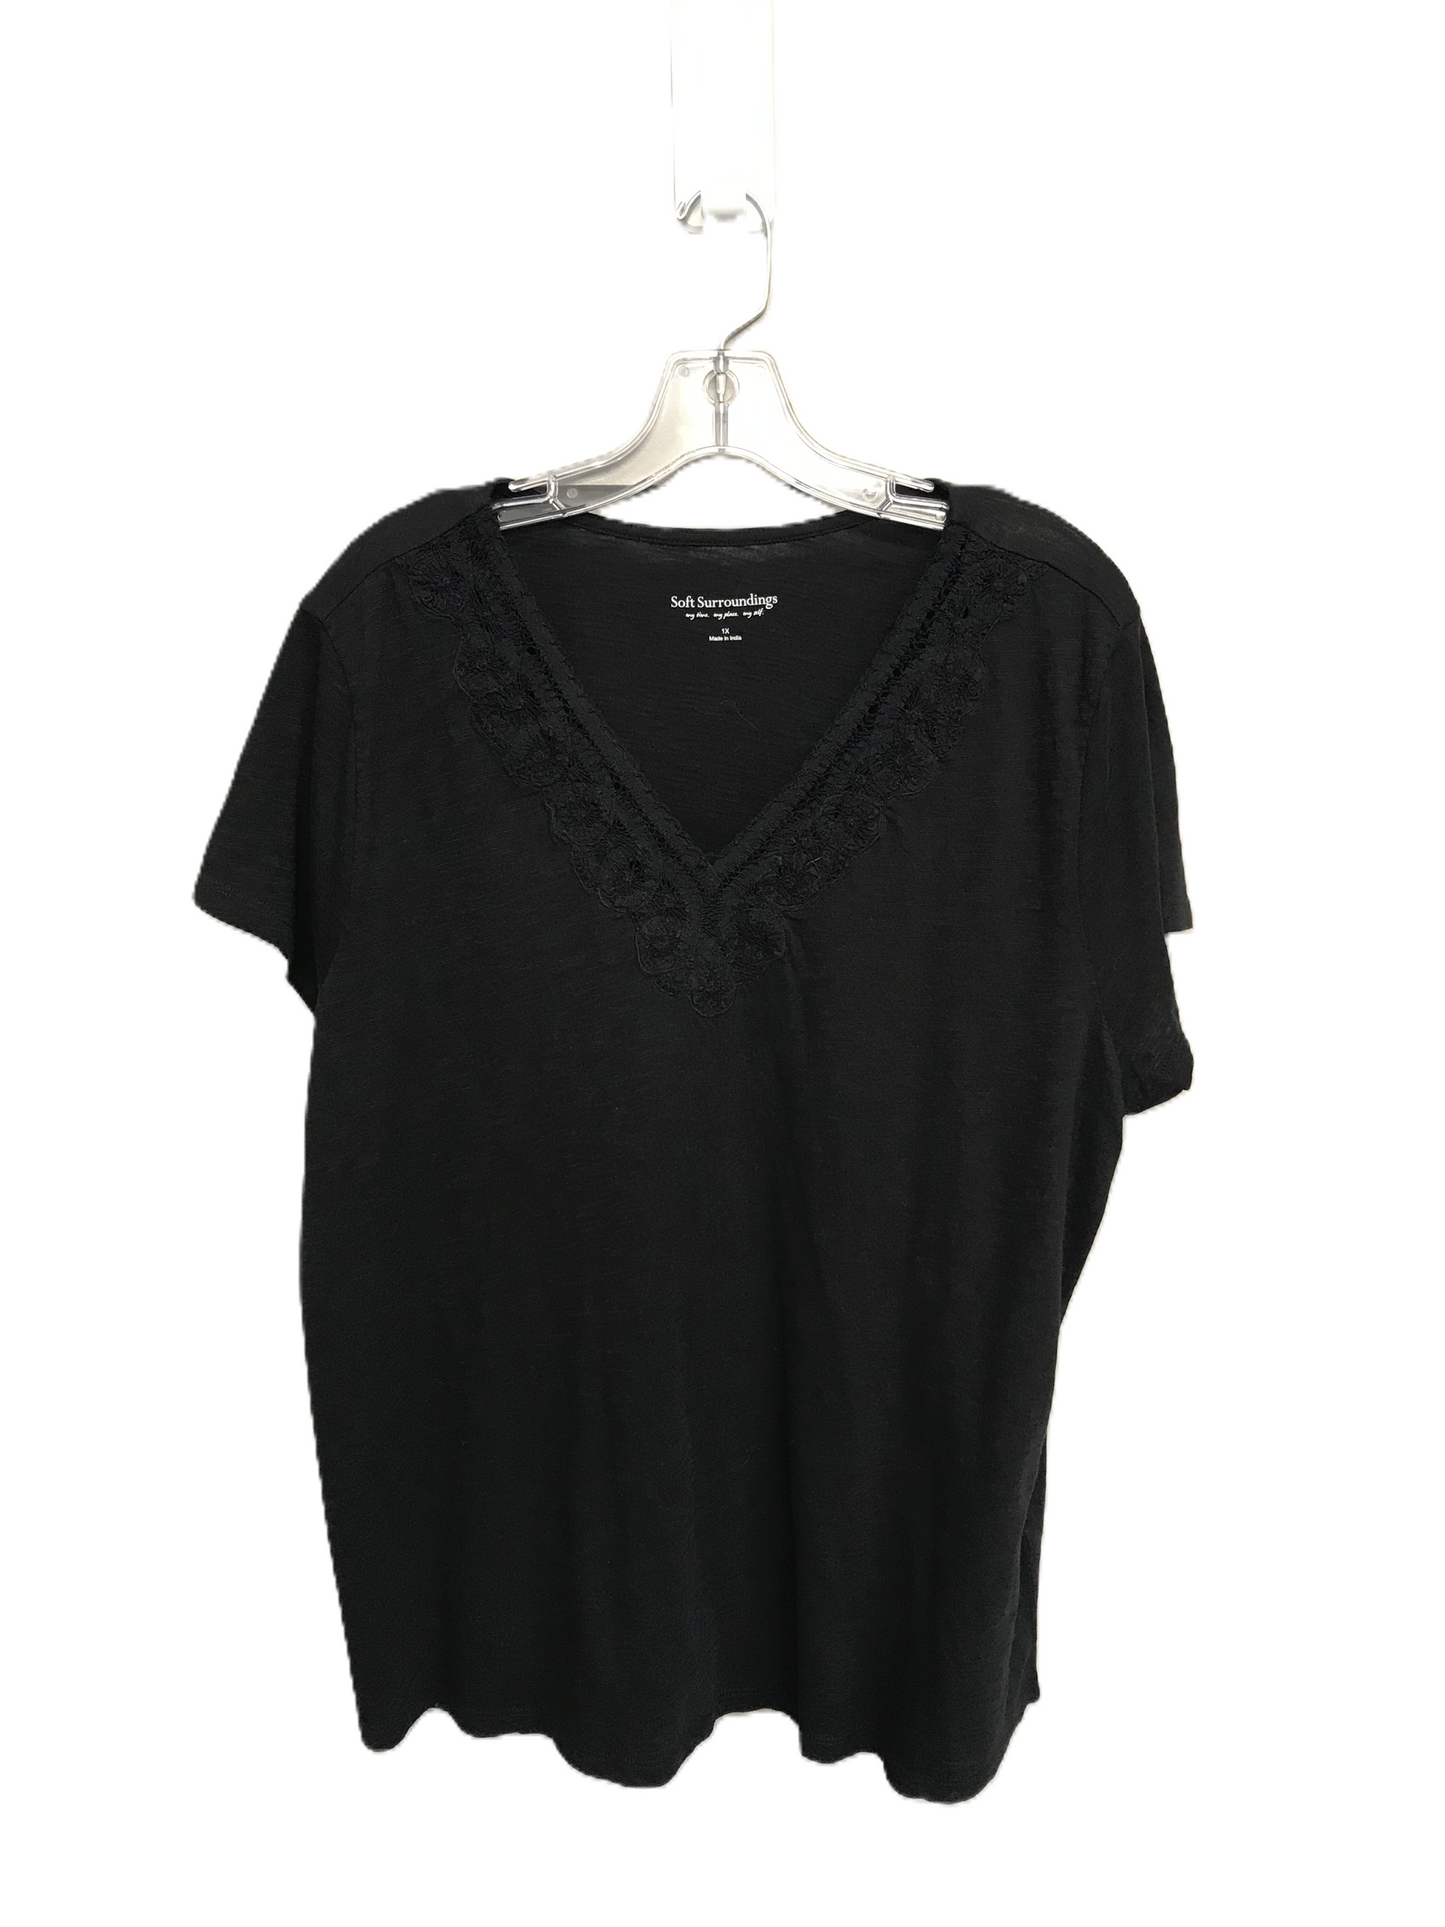 Black Top Short Sleeve Basic By Soft Surroundings, Size: 1x